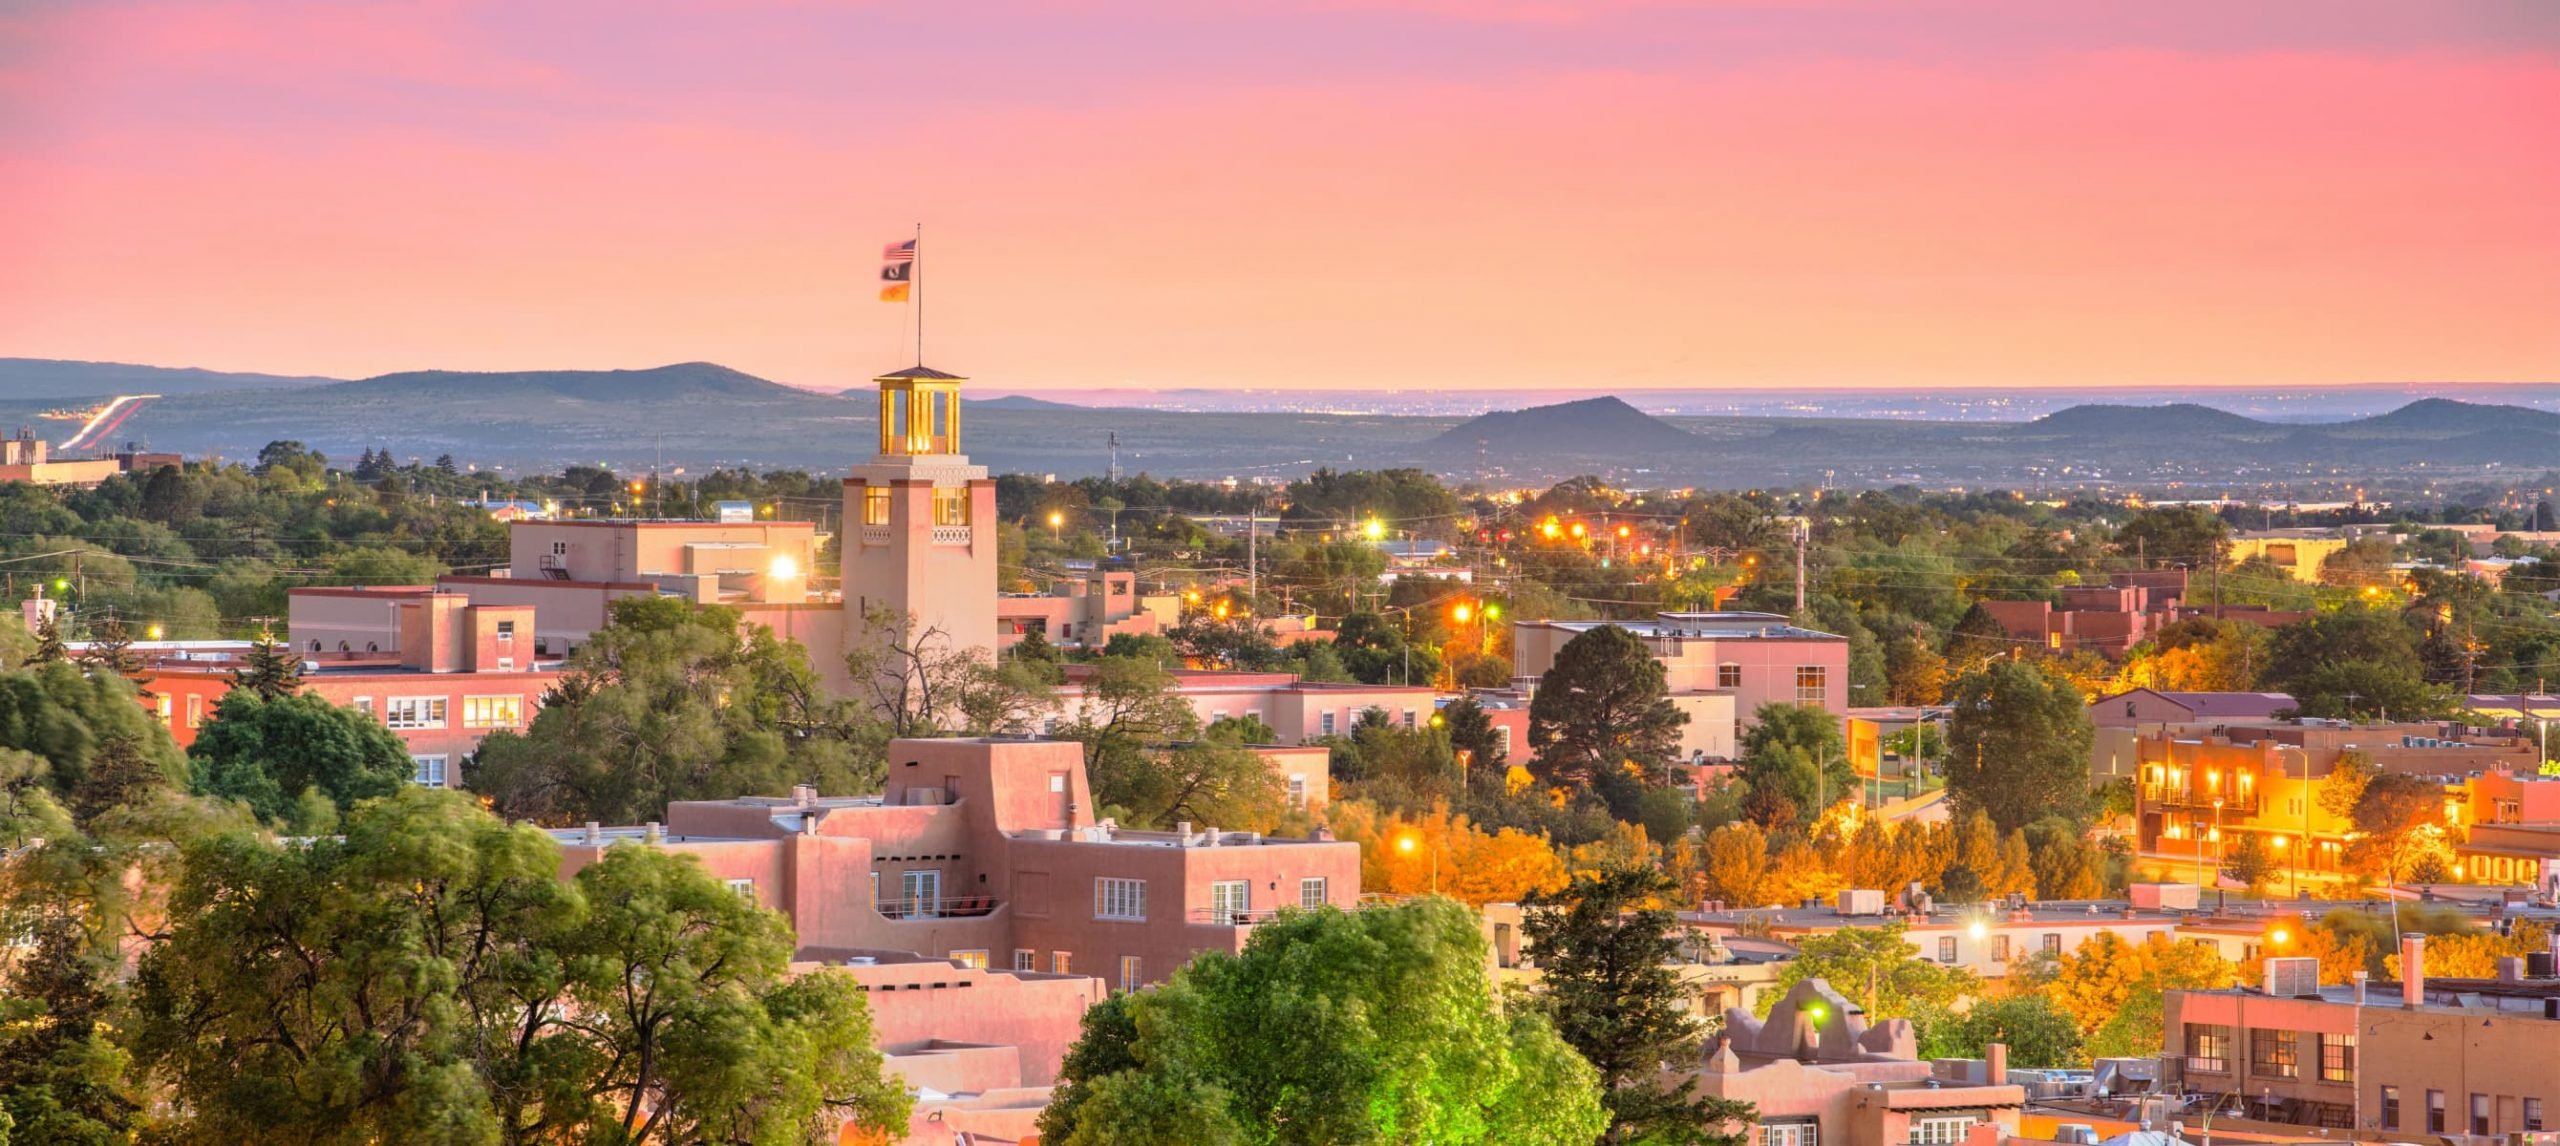 The 5 Best Hotels In Santa Fe, New Mexico